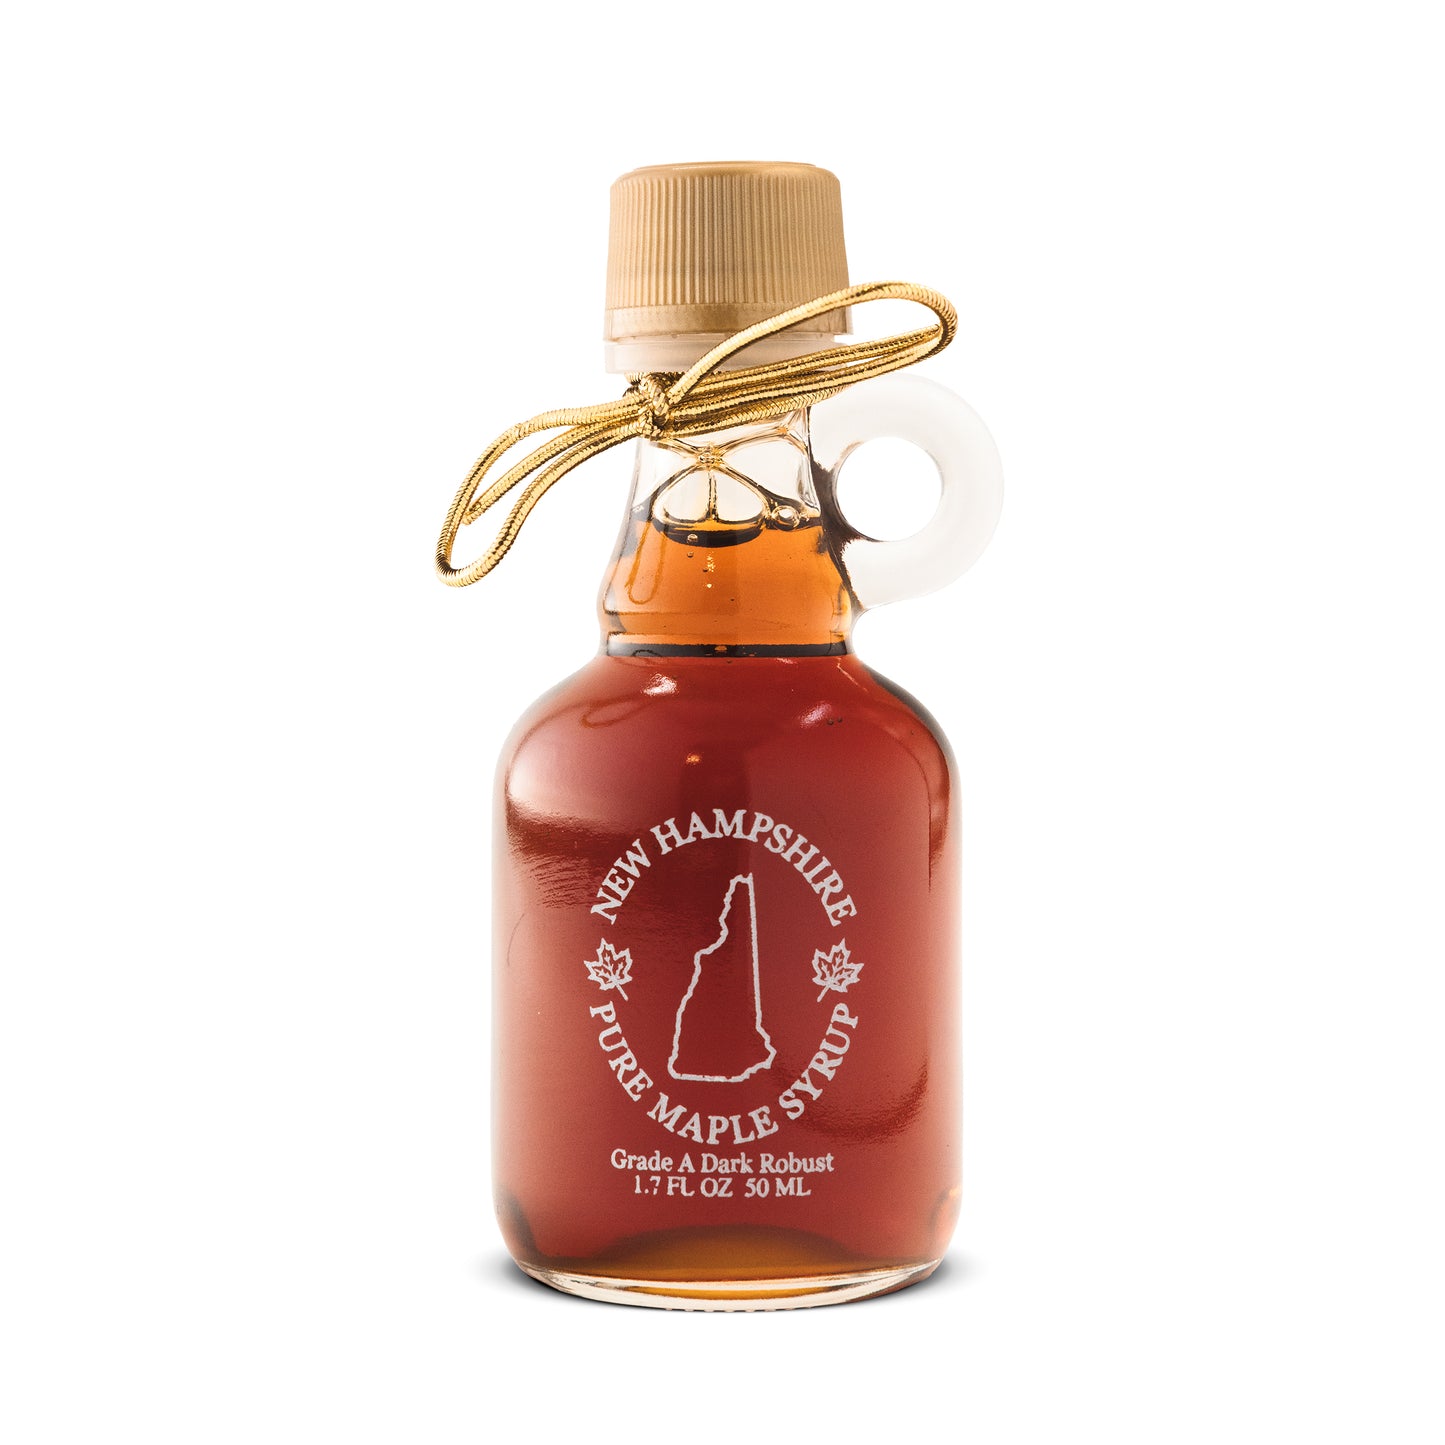 Ben's Pure Maple Syrup Favors - New Hampshire Glass Nip Bottle - 1.7 oz